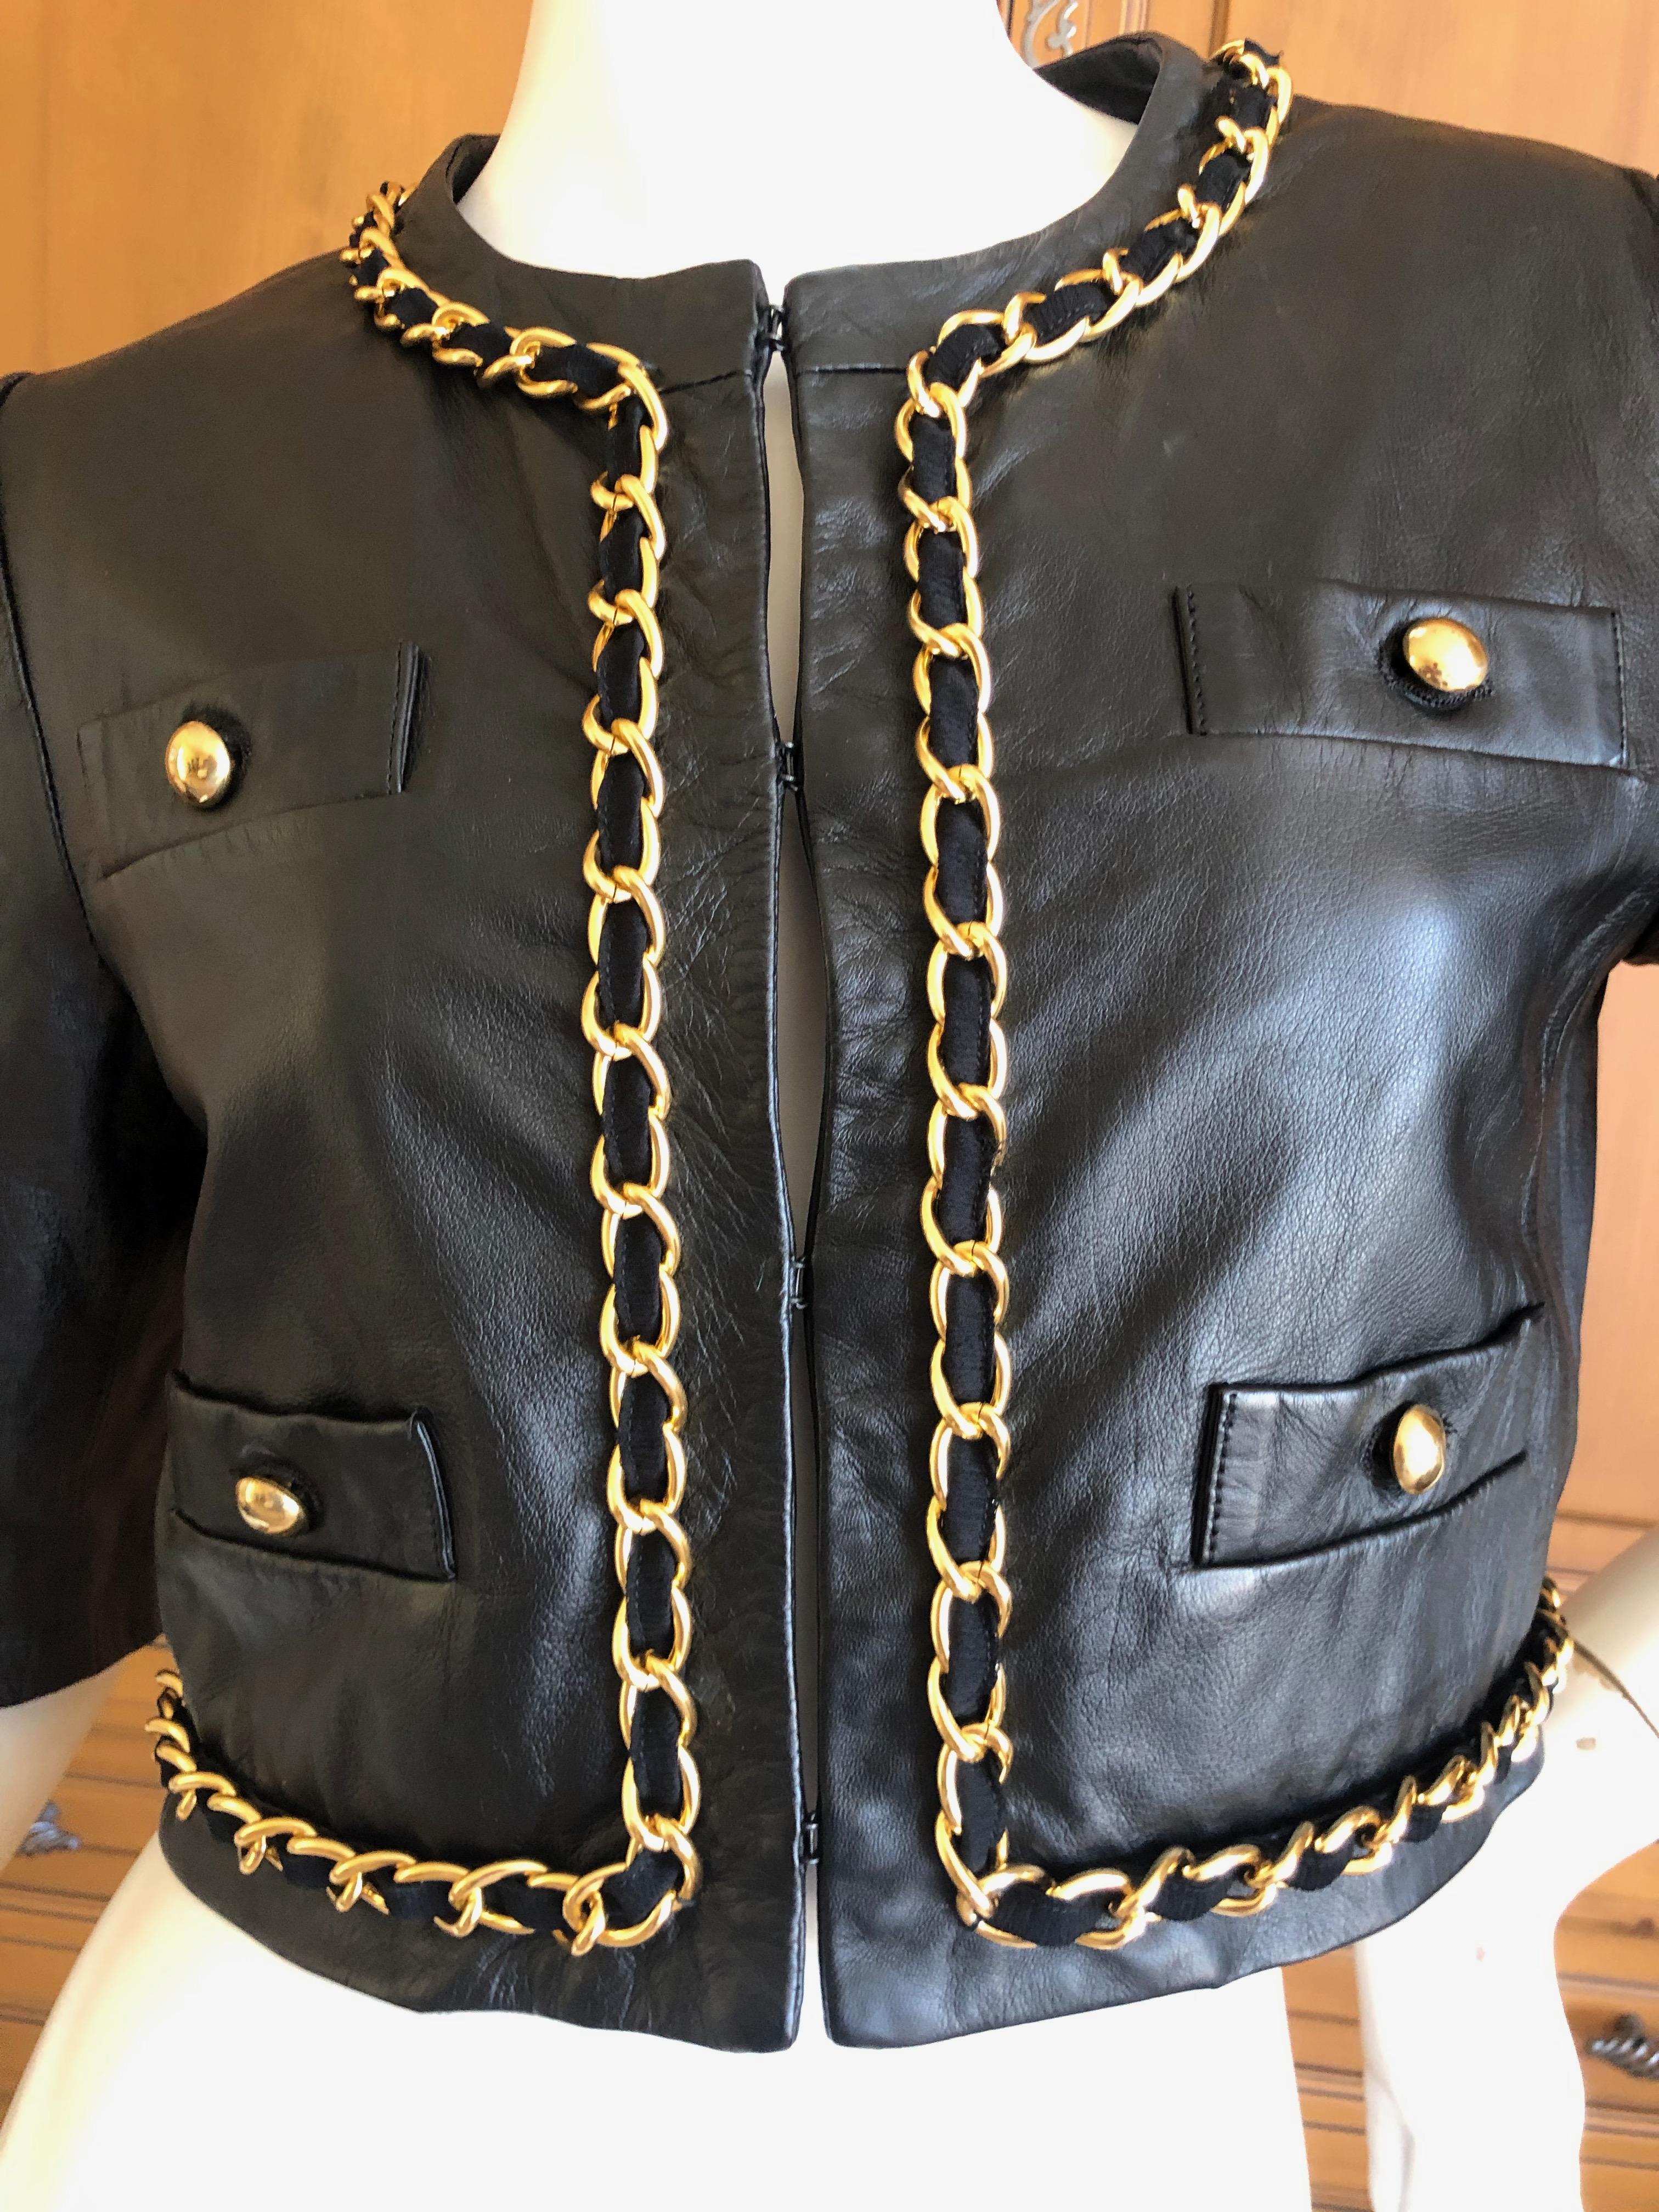 Moschino Cheap & Chic Vintage Cropped Black Lambskin Jacket with Gold Chain  In Excellent Condition For Sale In Cloverdale, CA